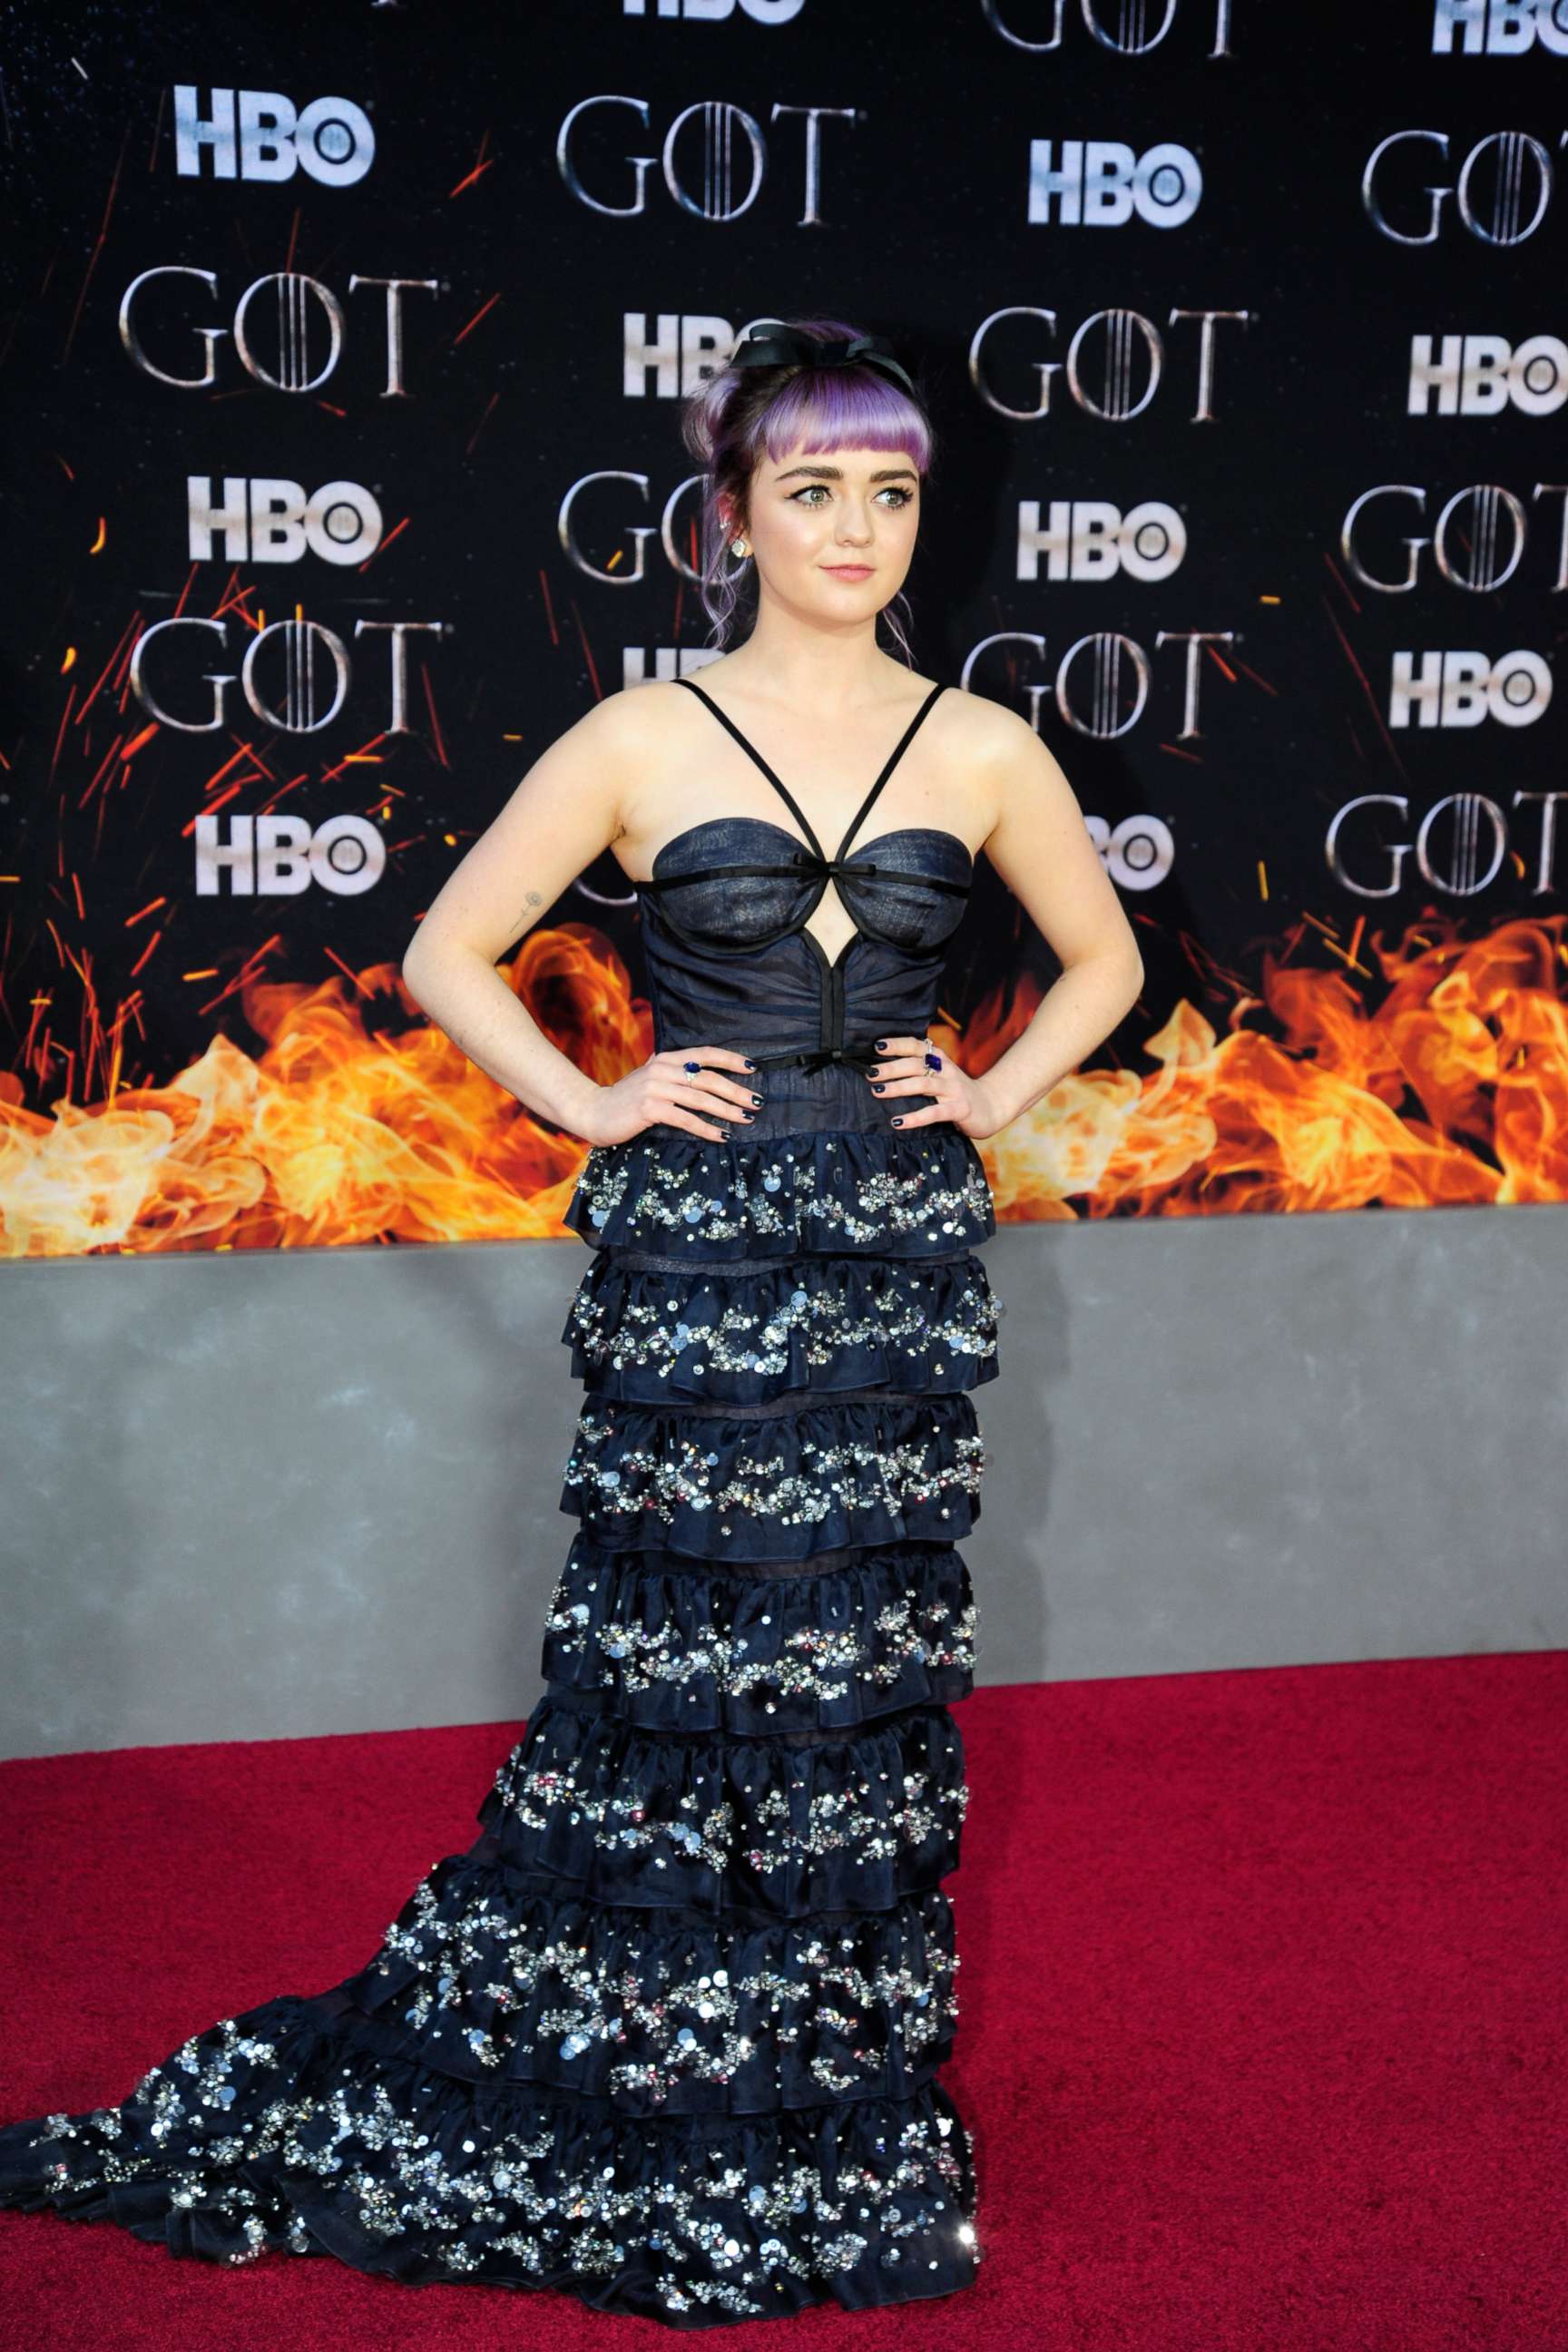 PHOTO: Maisie Williams attends "Game Of Thrones" New York Premiere at Radio City Music Hall, NYC on April 3, 2019 in New York City.